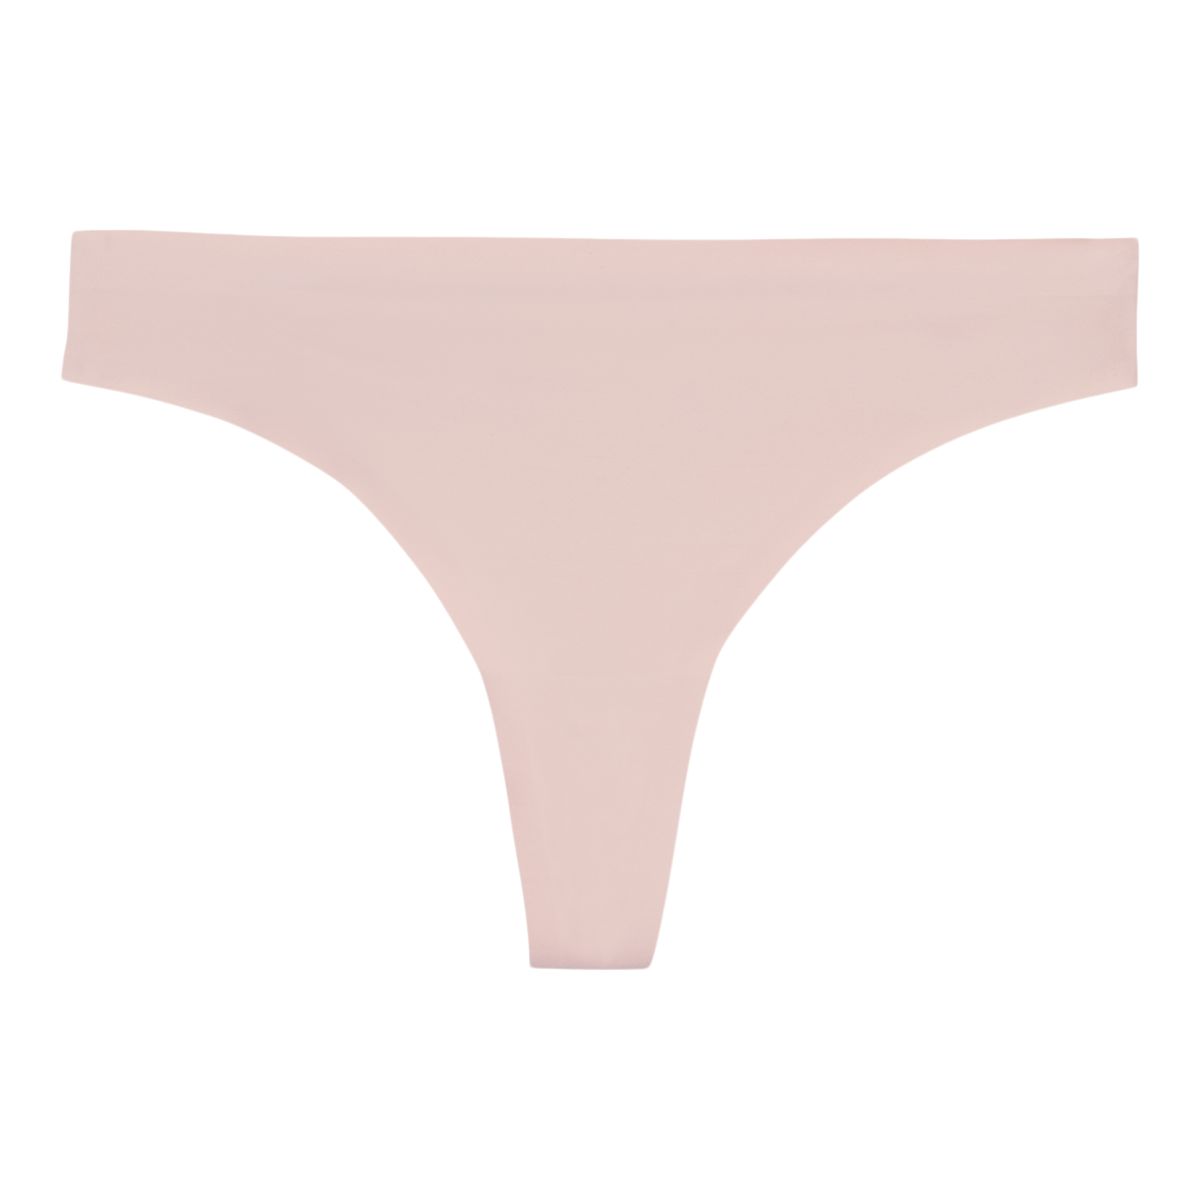 https://media-www.sportchek.ca/product/div-03-softgoods/dpt-79-clothing-accessories/sdpt-02-womens/333956714/fwd-women-s-seamless-thong-2-pack-e52ee62b-b5f1-4bda-9d78-ef26f040511c-jpgrendition.jpg?imdensity=1&imwidth=1244&impolicy=mZoom